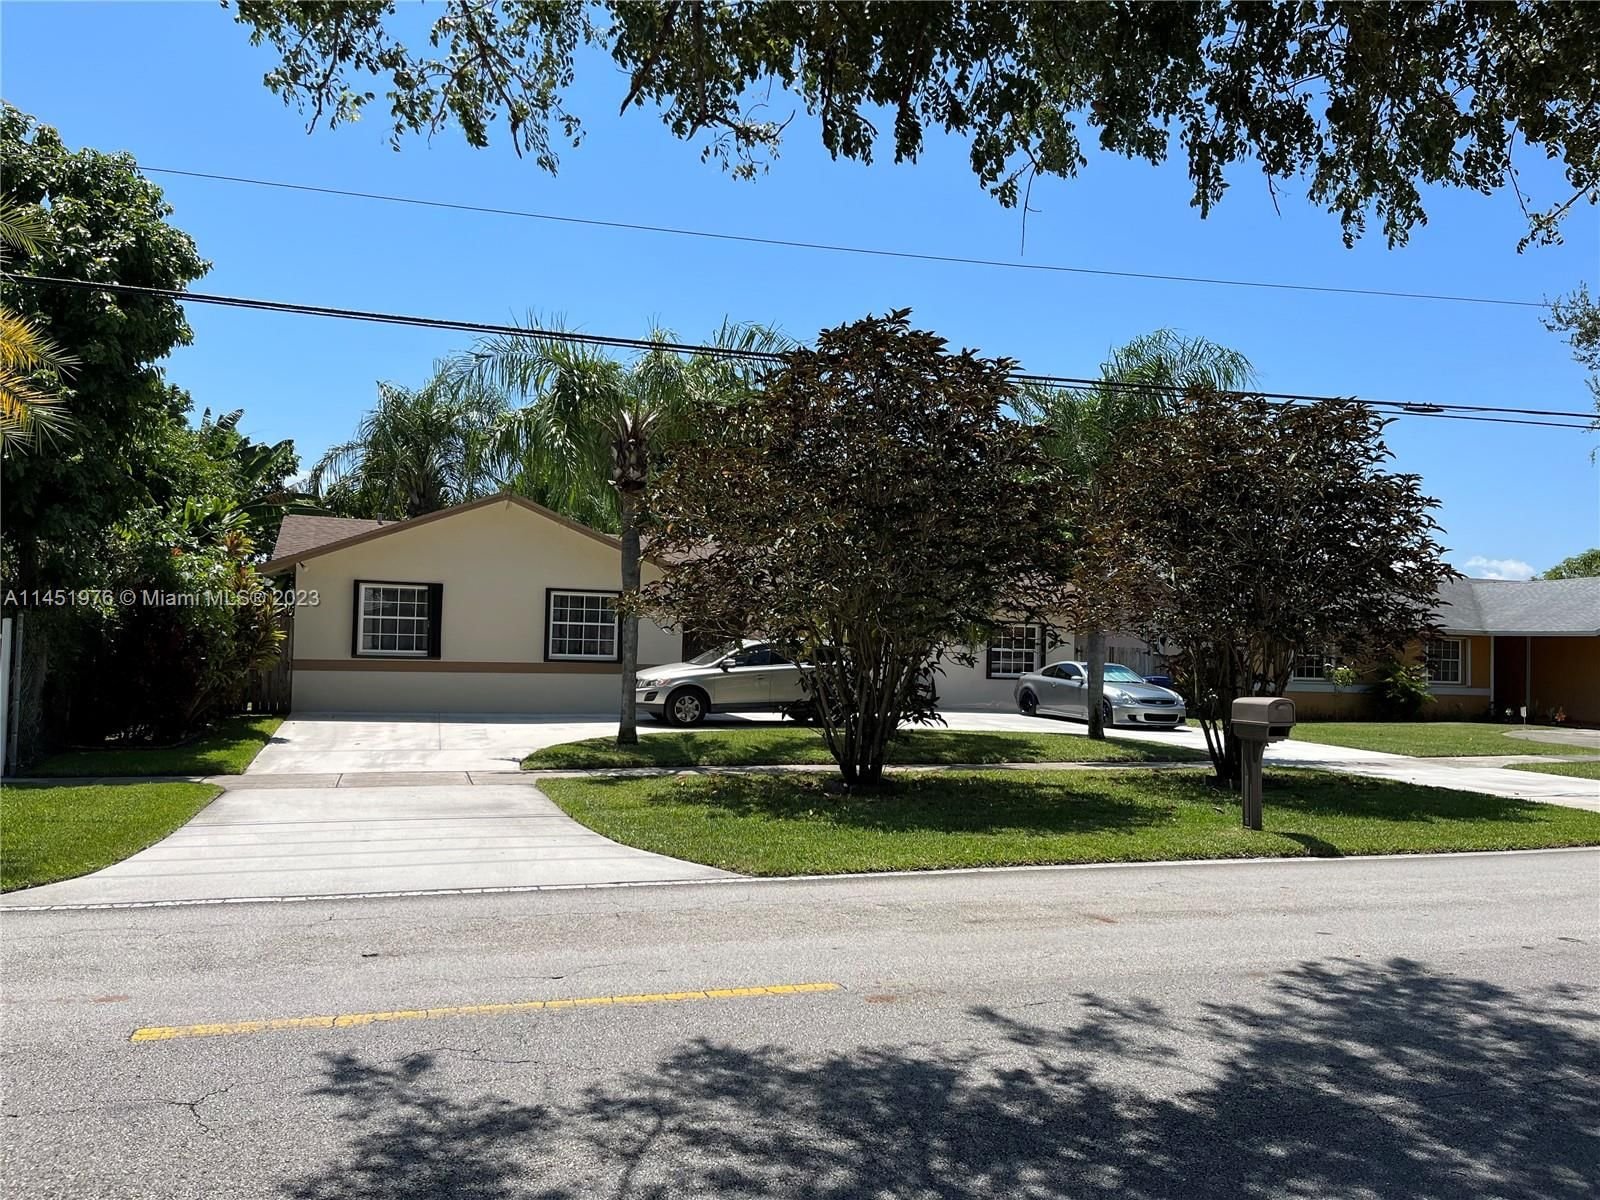 Real estate property located at 13420 256th St, Miami-Dade County, Homestead, FL